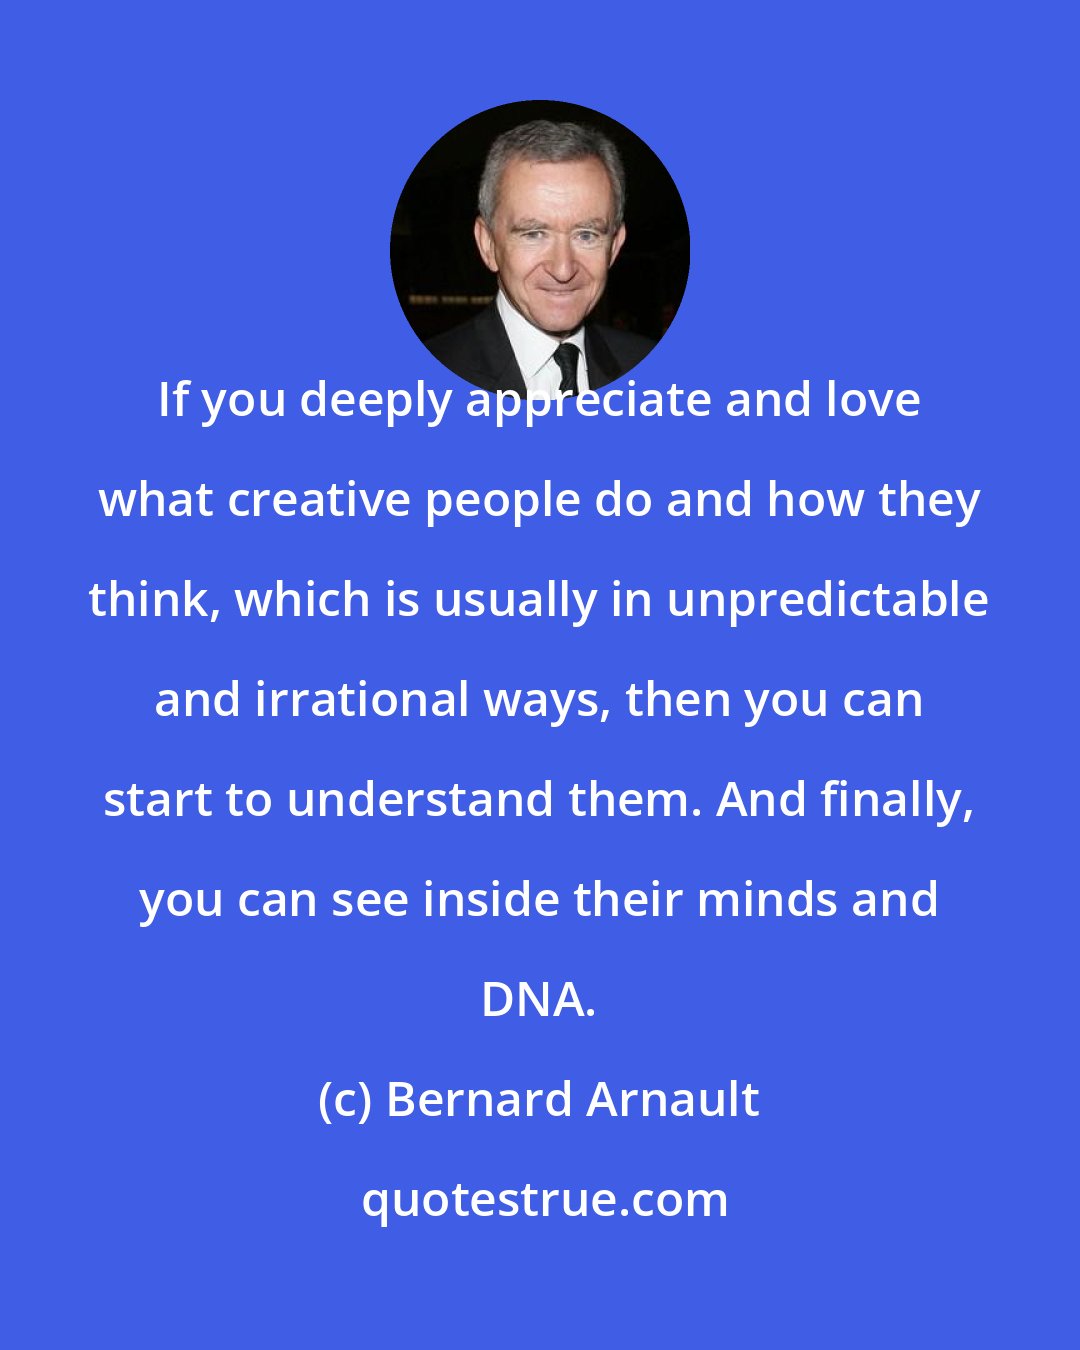 Bernard Arnault: If you deeply appreciate and love what creative people do and how they think, which is usually in unpredictable and irrational ways, then you can start to understand them. And finally, you can see inside their minds and DNA.